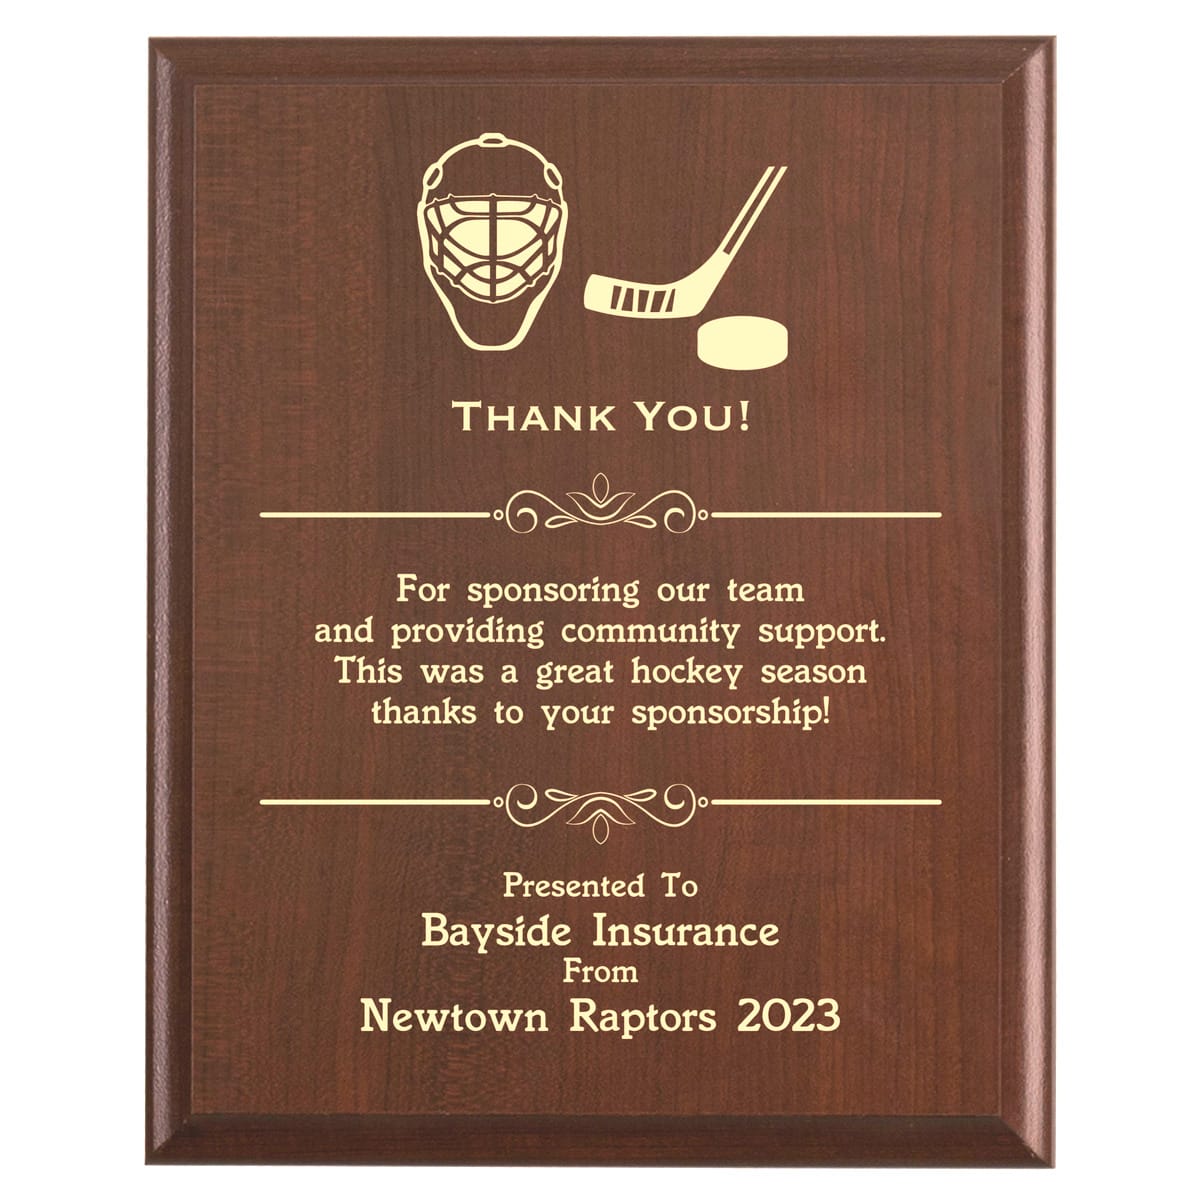 Plaque photo: Hockey Sponsor Thank You Gift design with free personalization. Wood style finish with customized text.